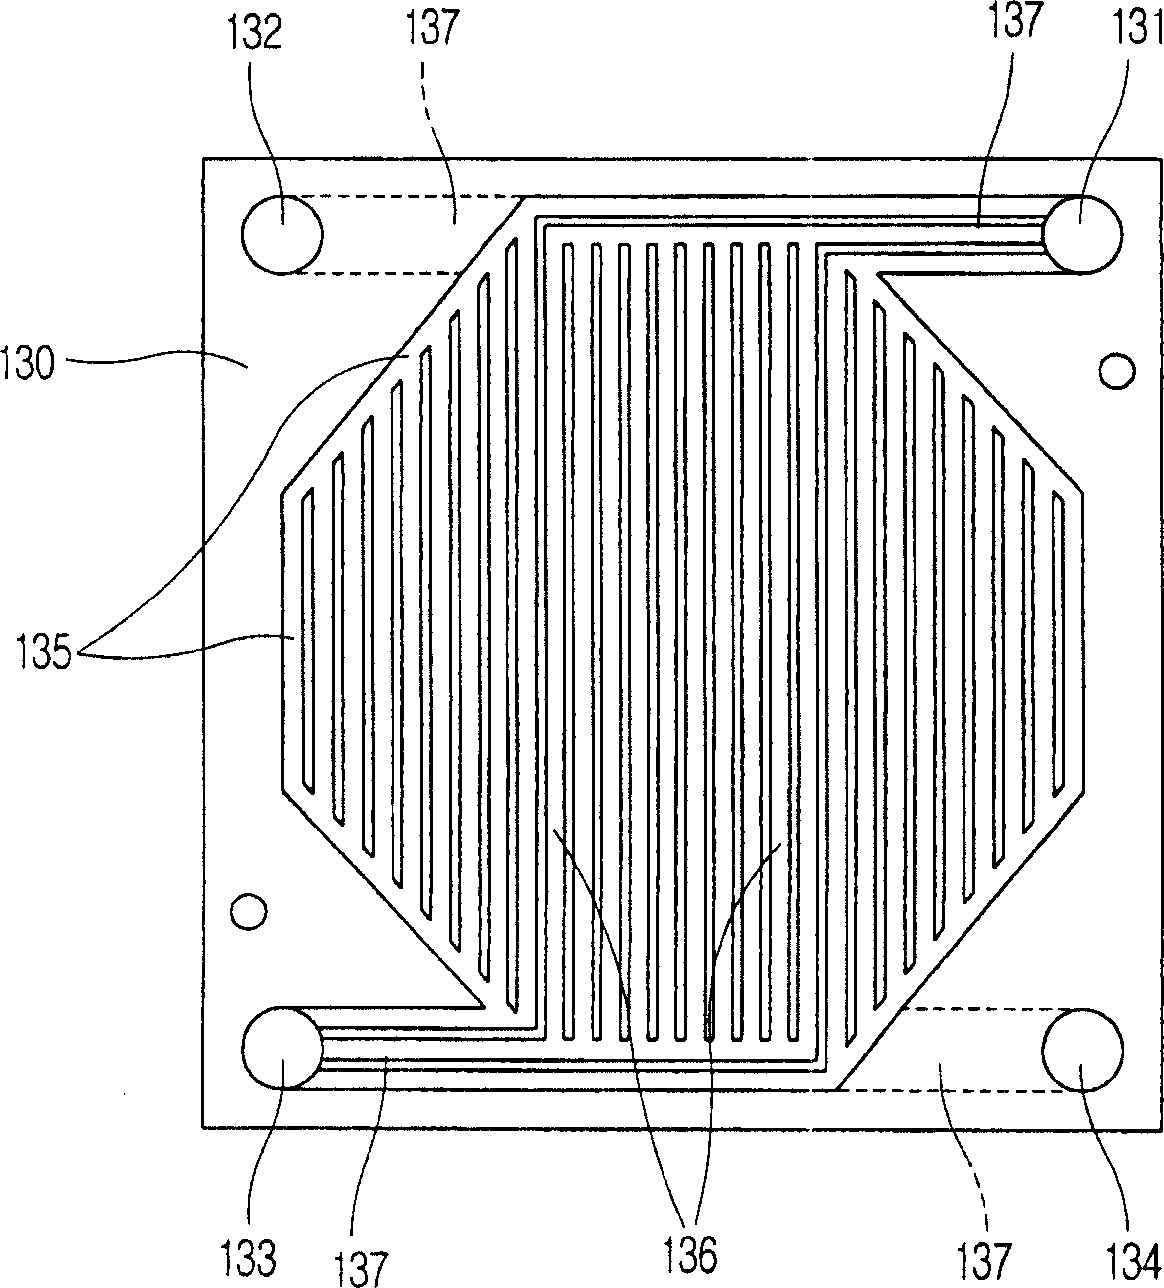 Bipolar plate of fuel cell